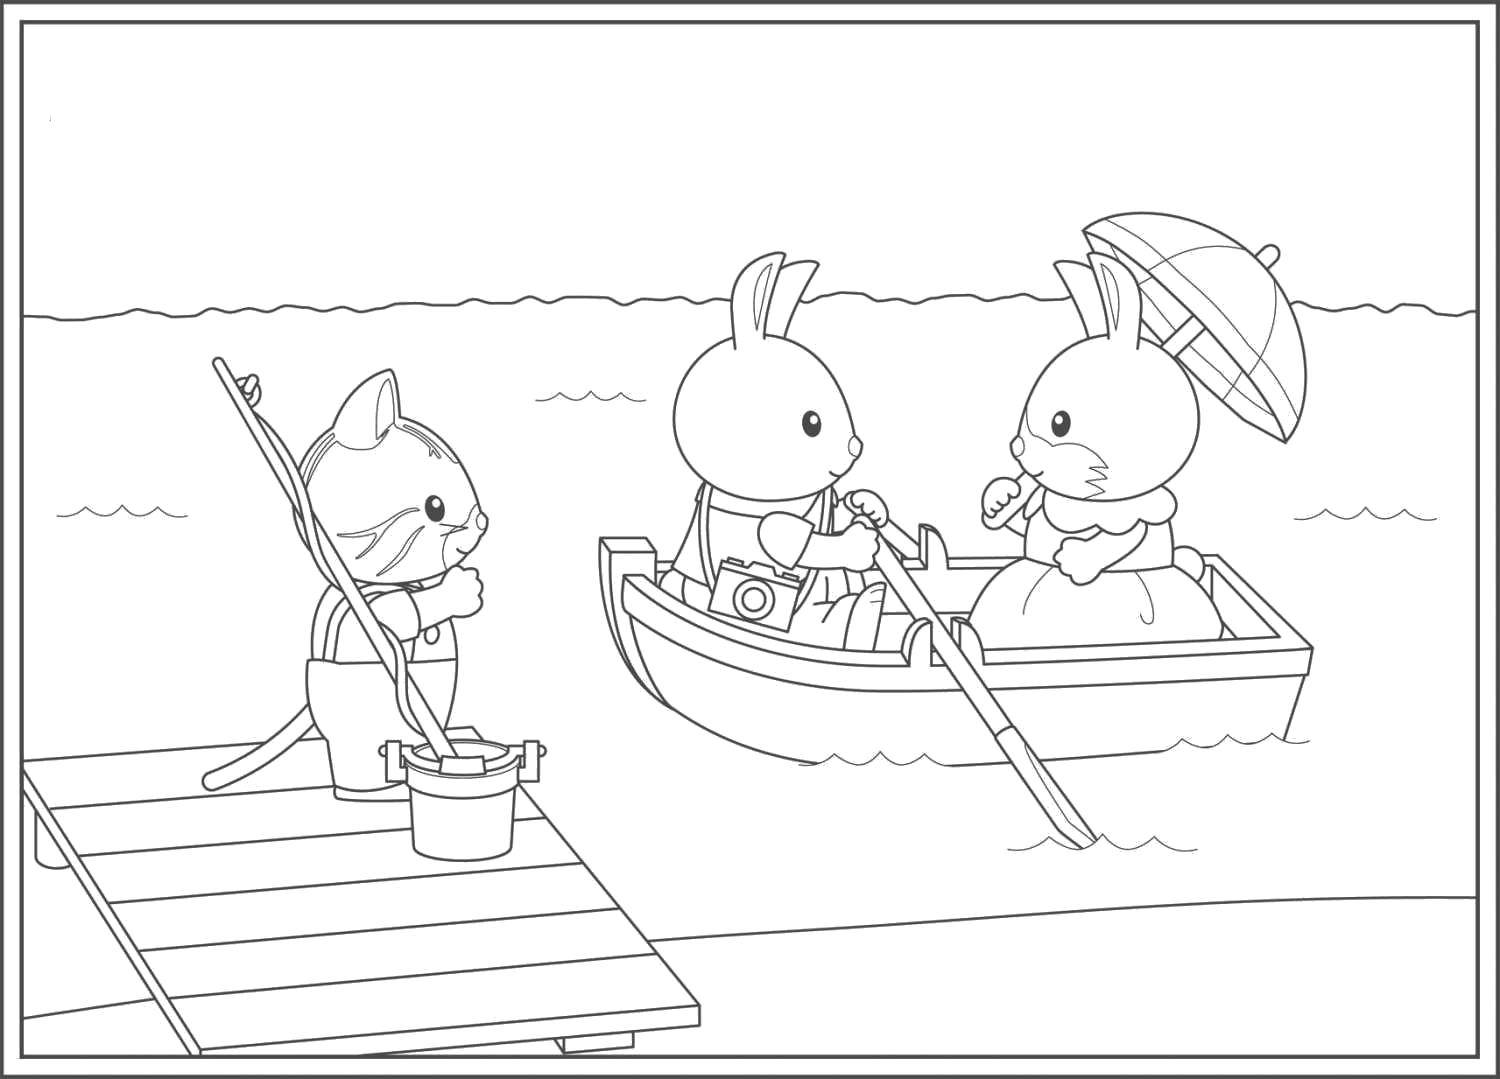 Coloring Water activities animals. Category family animals. Tags:  Leisure, kids, water, fun, animals.